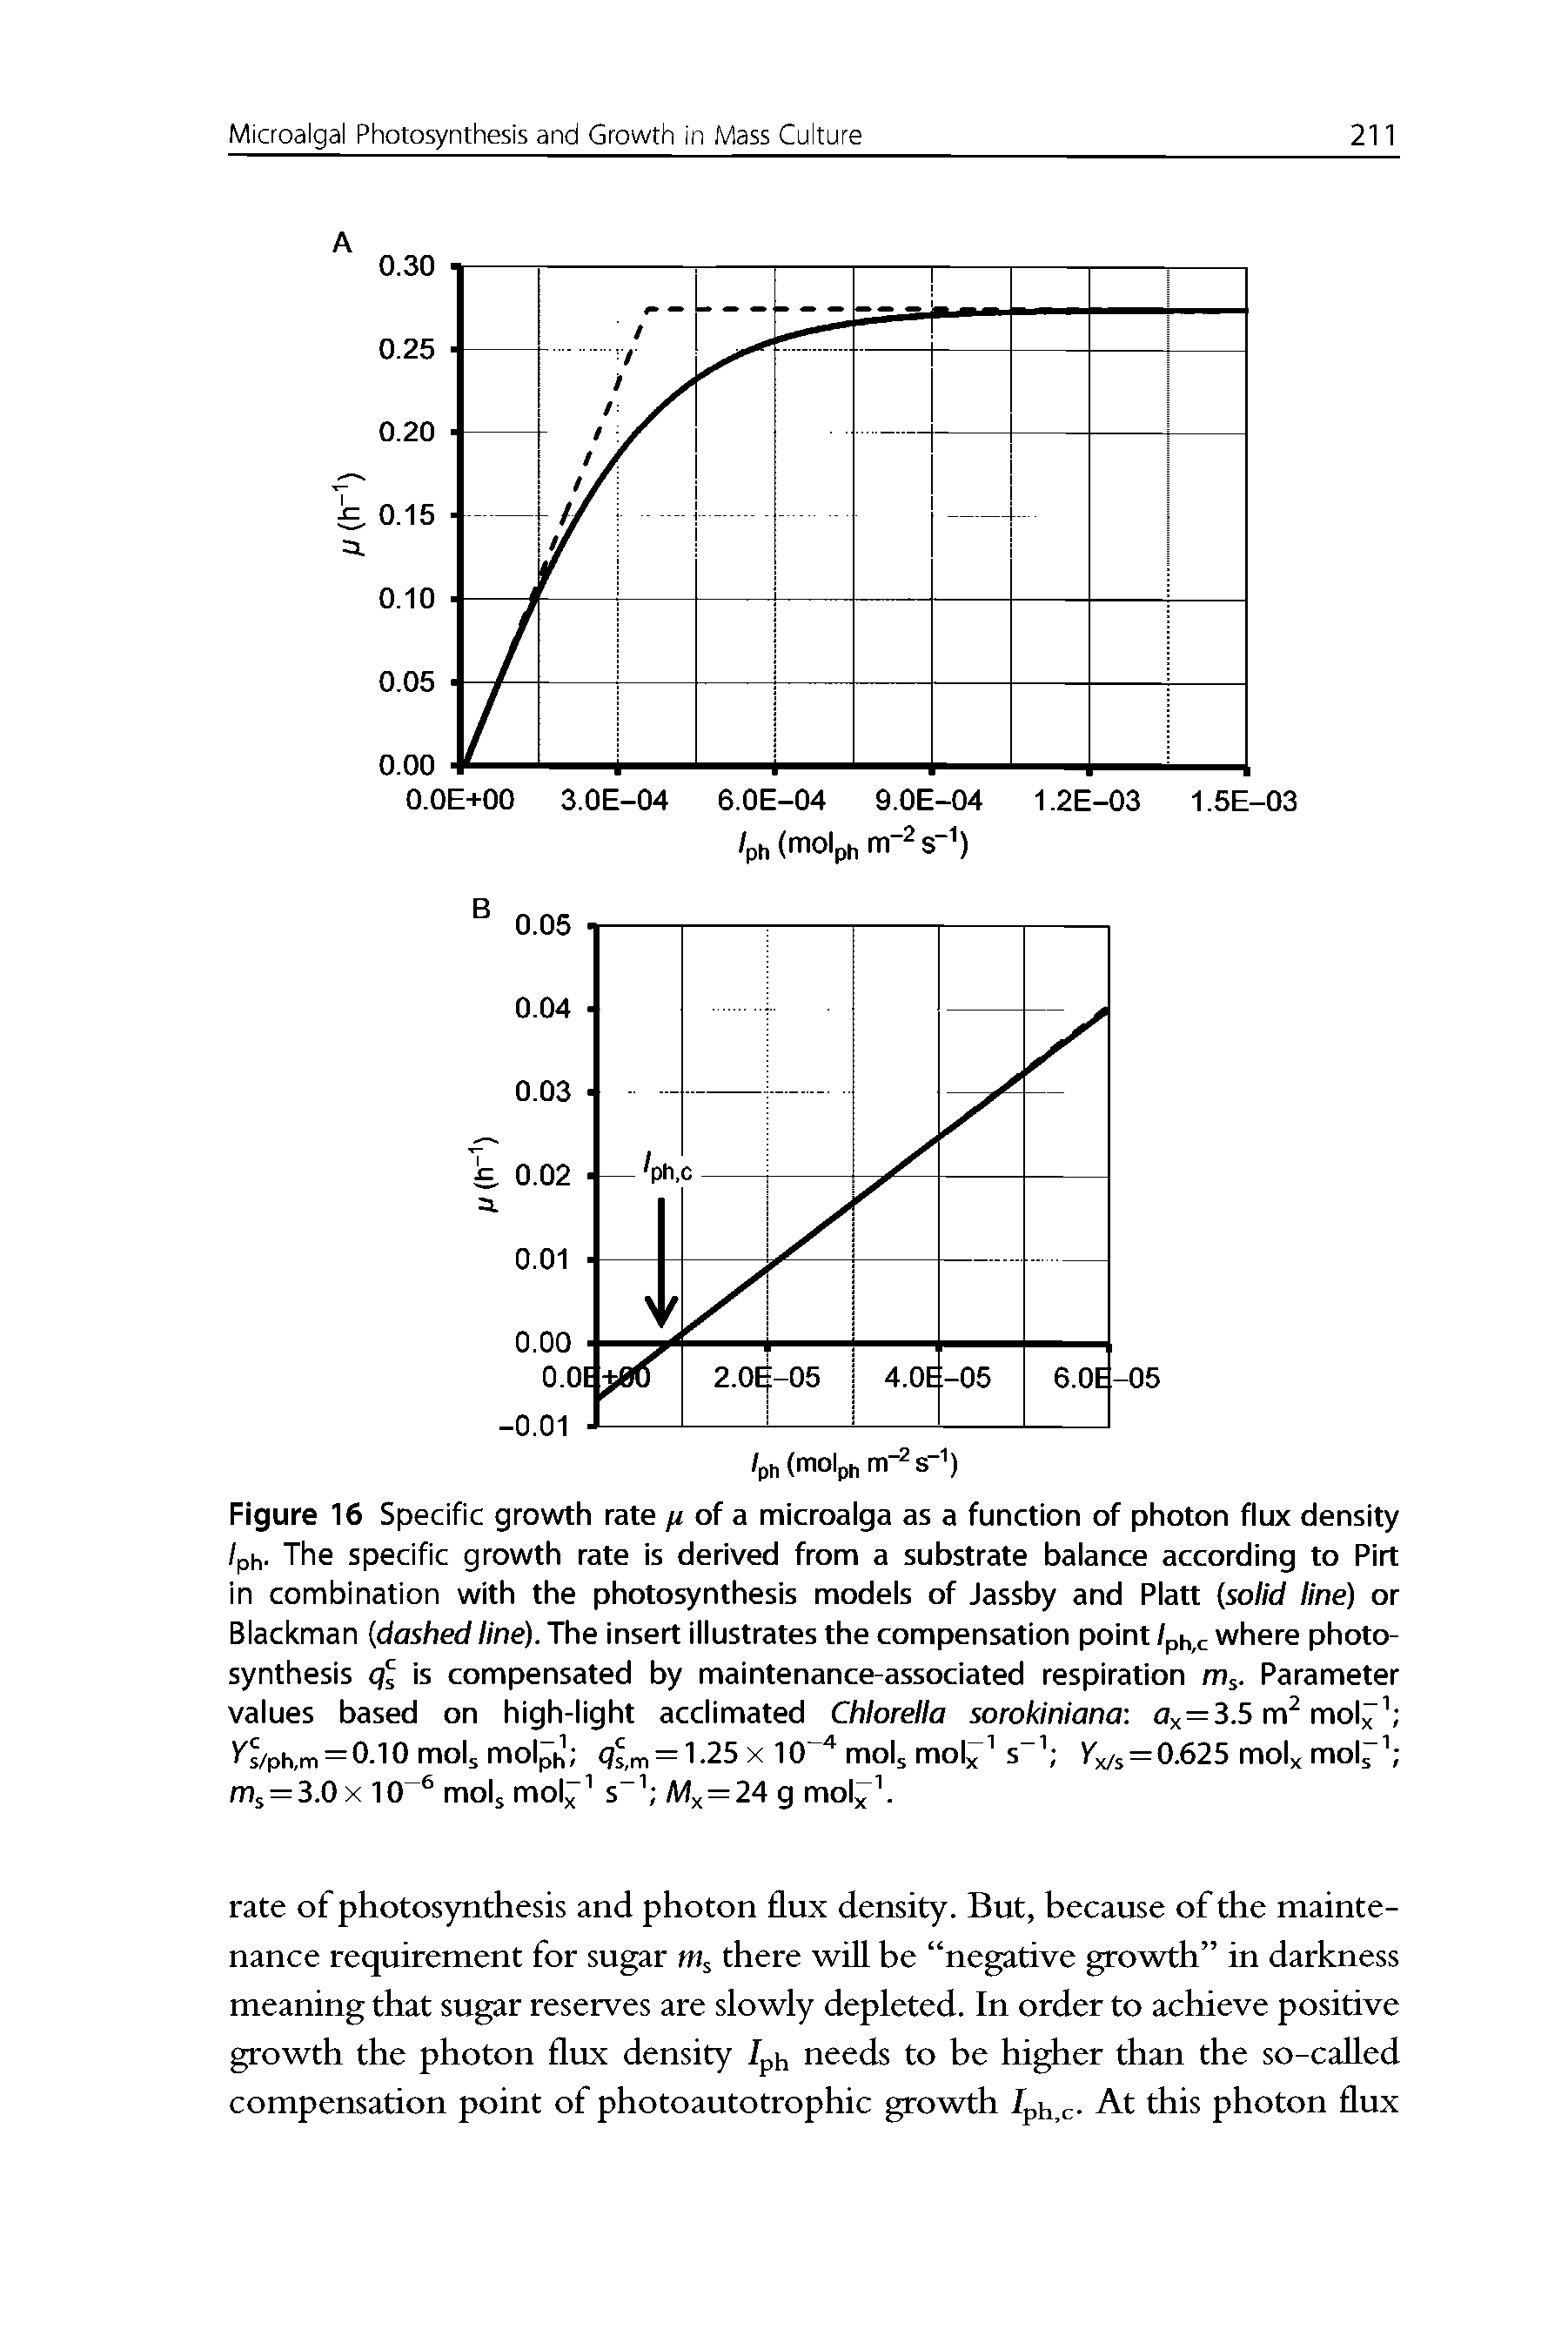 Figure 16 Specific growth rate // of a microaiga as a function of photon flux density /ph. The specific growth rate is derived from a substrate baiance according to Pirt in combination with the photosynthesis modeis of Jassby and Piatt (solid line) or Blackman (dashed line). The insert illustrates the compensation point /ph,c where photosynthesis is compensated by maintenance-associated respiration m. Parameter values based on high-light acclimated Chlorella sorokiniana 0x=3.5 m moix s/ph,m = 0.10 mols molph qs , = 1.25 x 10 mols mof s y x/s = 0.625 moix mol nis = 3.0x 10 mols moix s M =24 g mol.